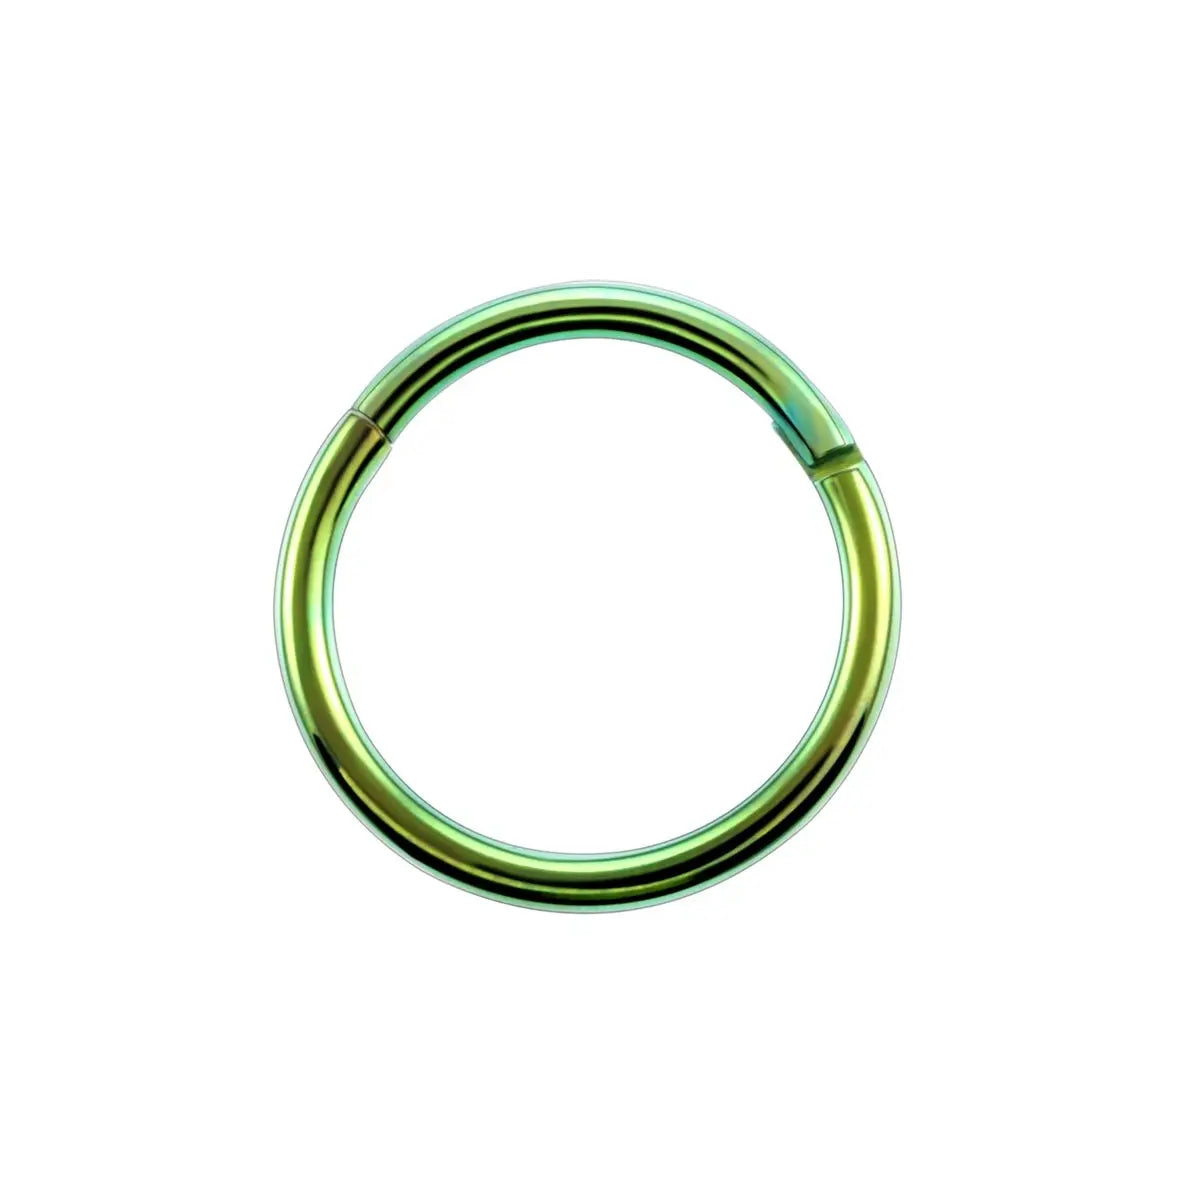 Nose ring hoop 6mm 8mm 10 mm simple and minimalist hinged segment clicker